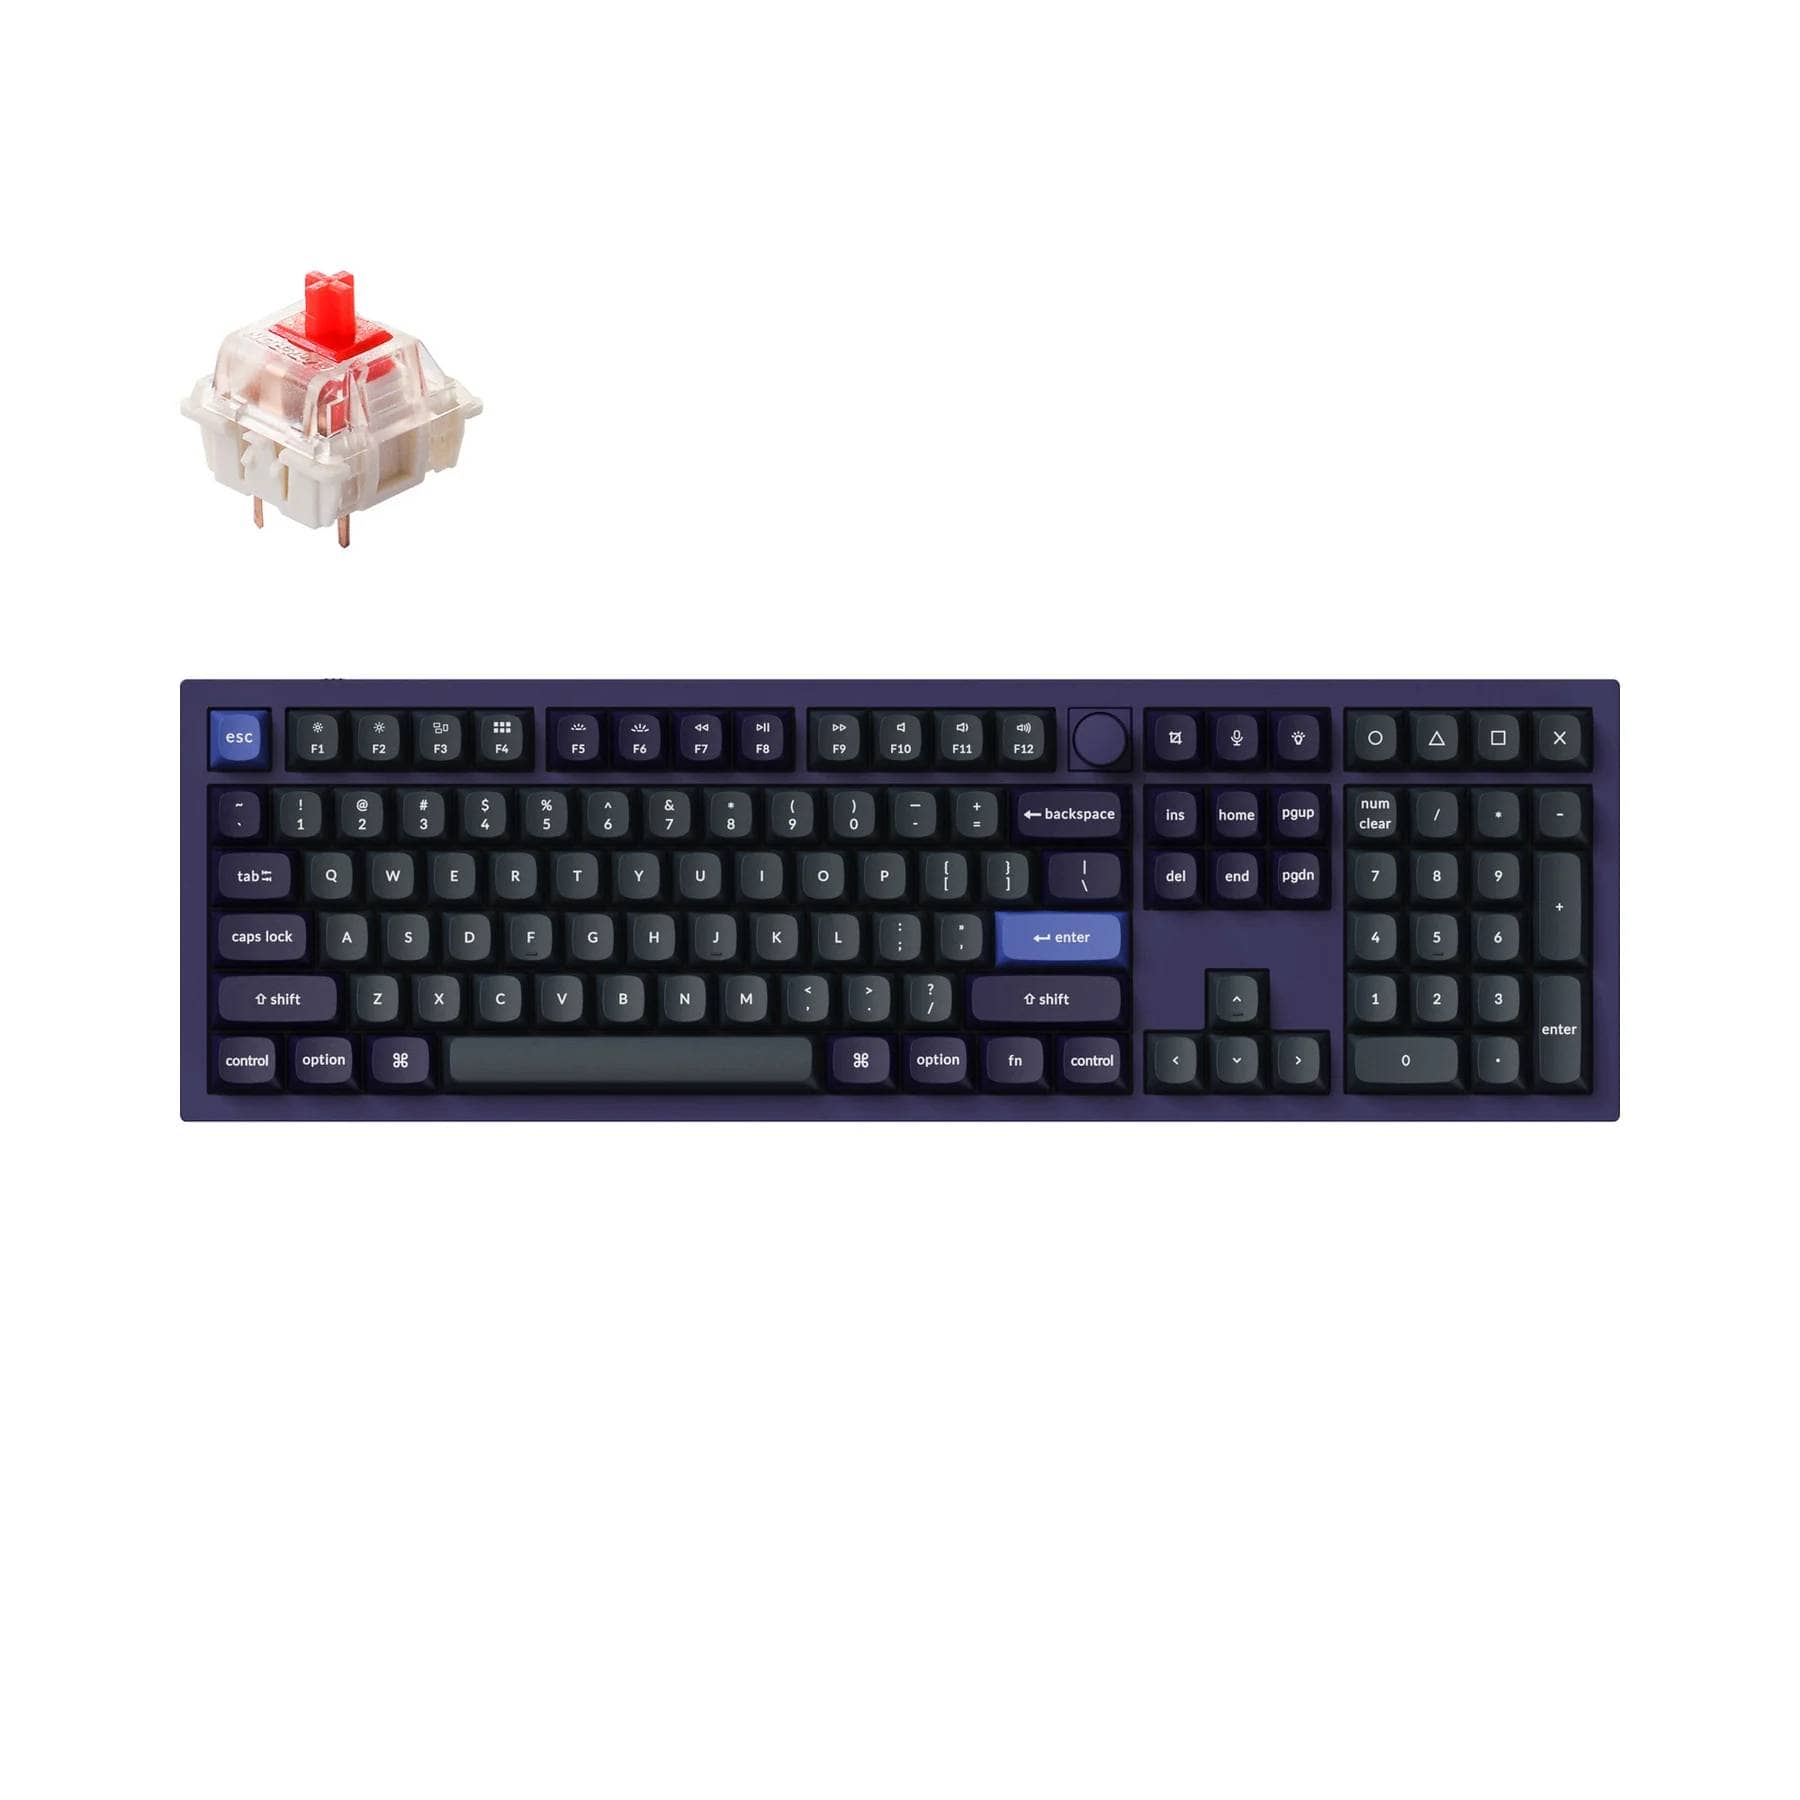 Keychron Q6 QMK VIA custom mechanical keyboard full size 100 percent layout full aluminum frame special edition purple for Mac Windows RGB backlight with hot swappable Gateron G Pro